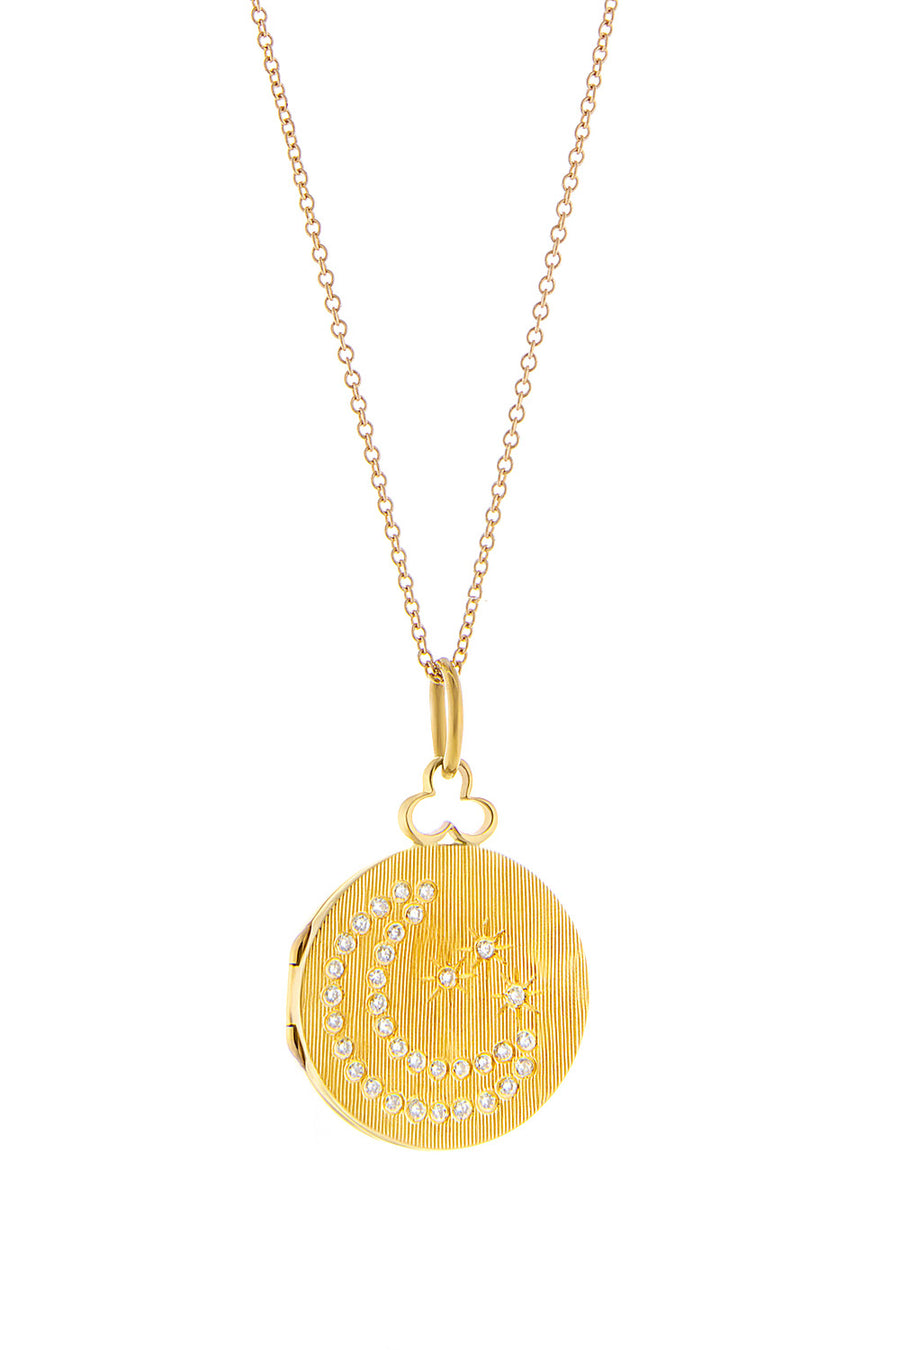 Moon and stars diamond locket necklace crafted in radiant 18k gold, capturing the celestial beauty of the night sky. This enchanting piece features a delicate locket adorned with sparkling diamonds arranged in a celestial motif of moons and stars. The shimmering diamonds reflect the brilliance of the night, creating a mesmerizing accessory that evokes the magic and wonder of the cosmos.